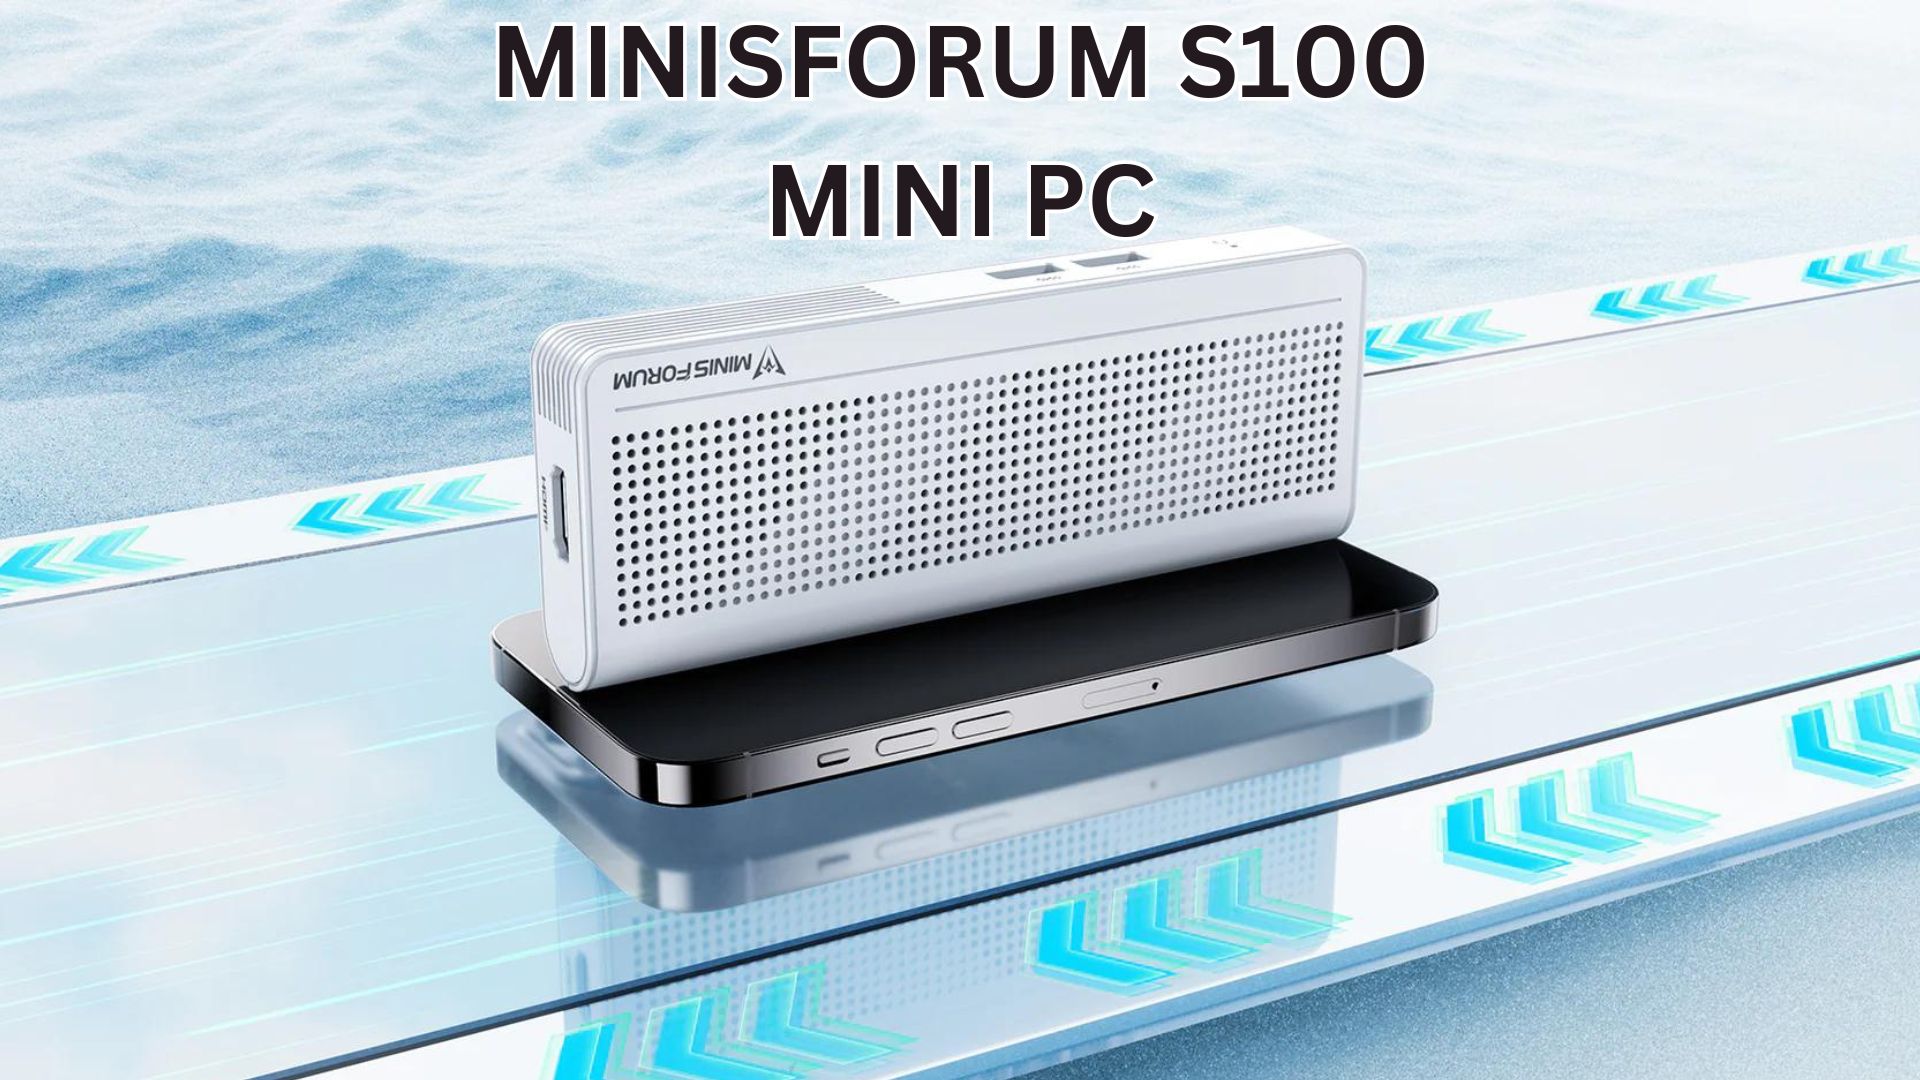 Introducing the Minisforum S100: Now Available for Pre-Order